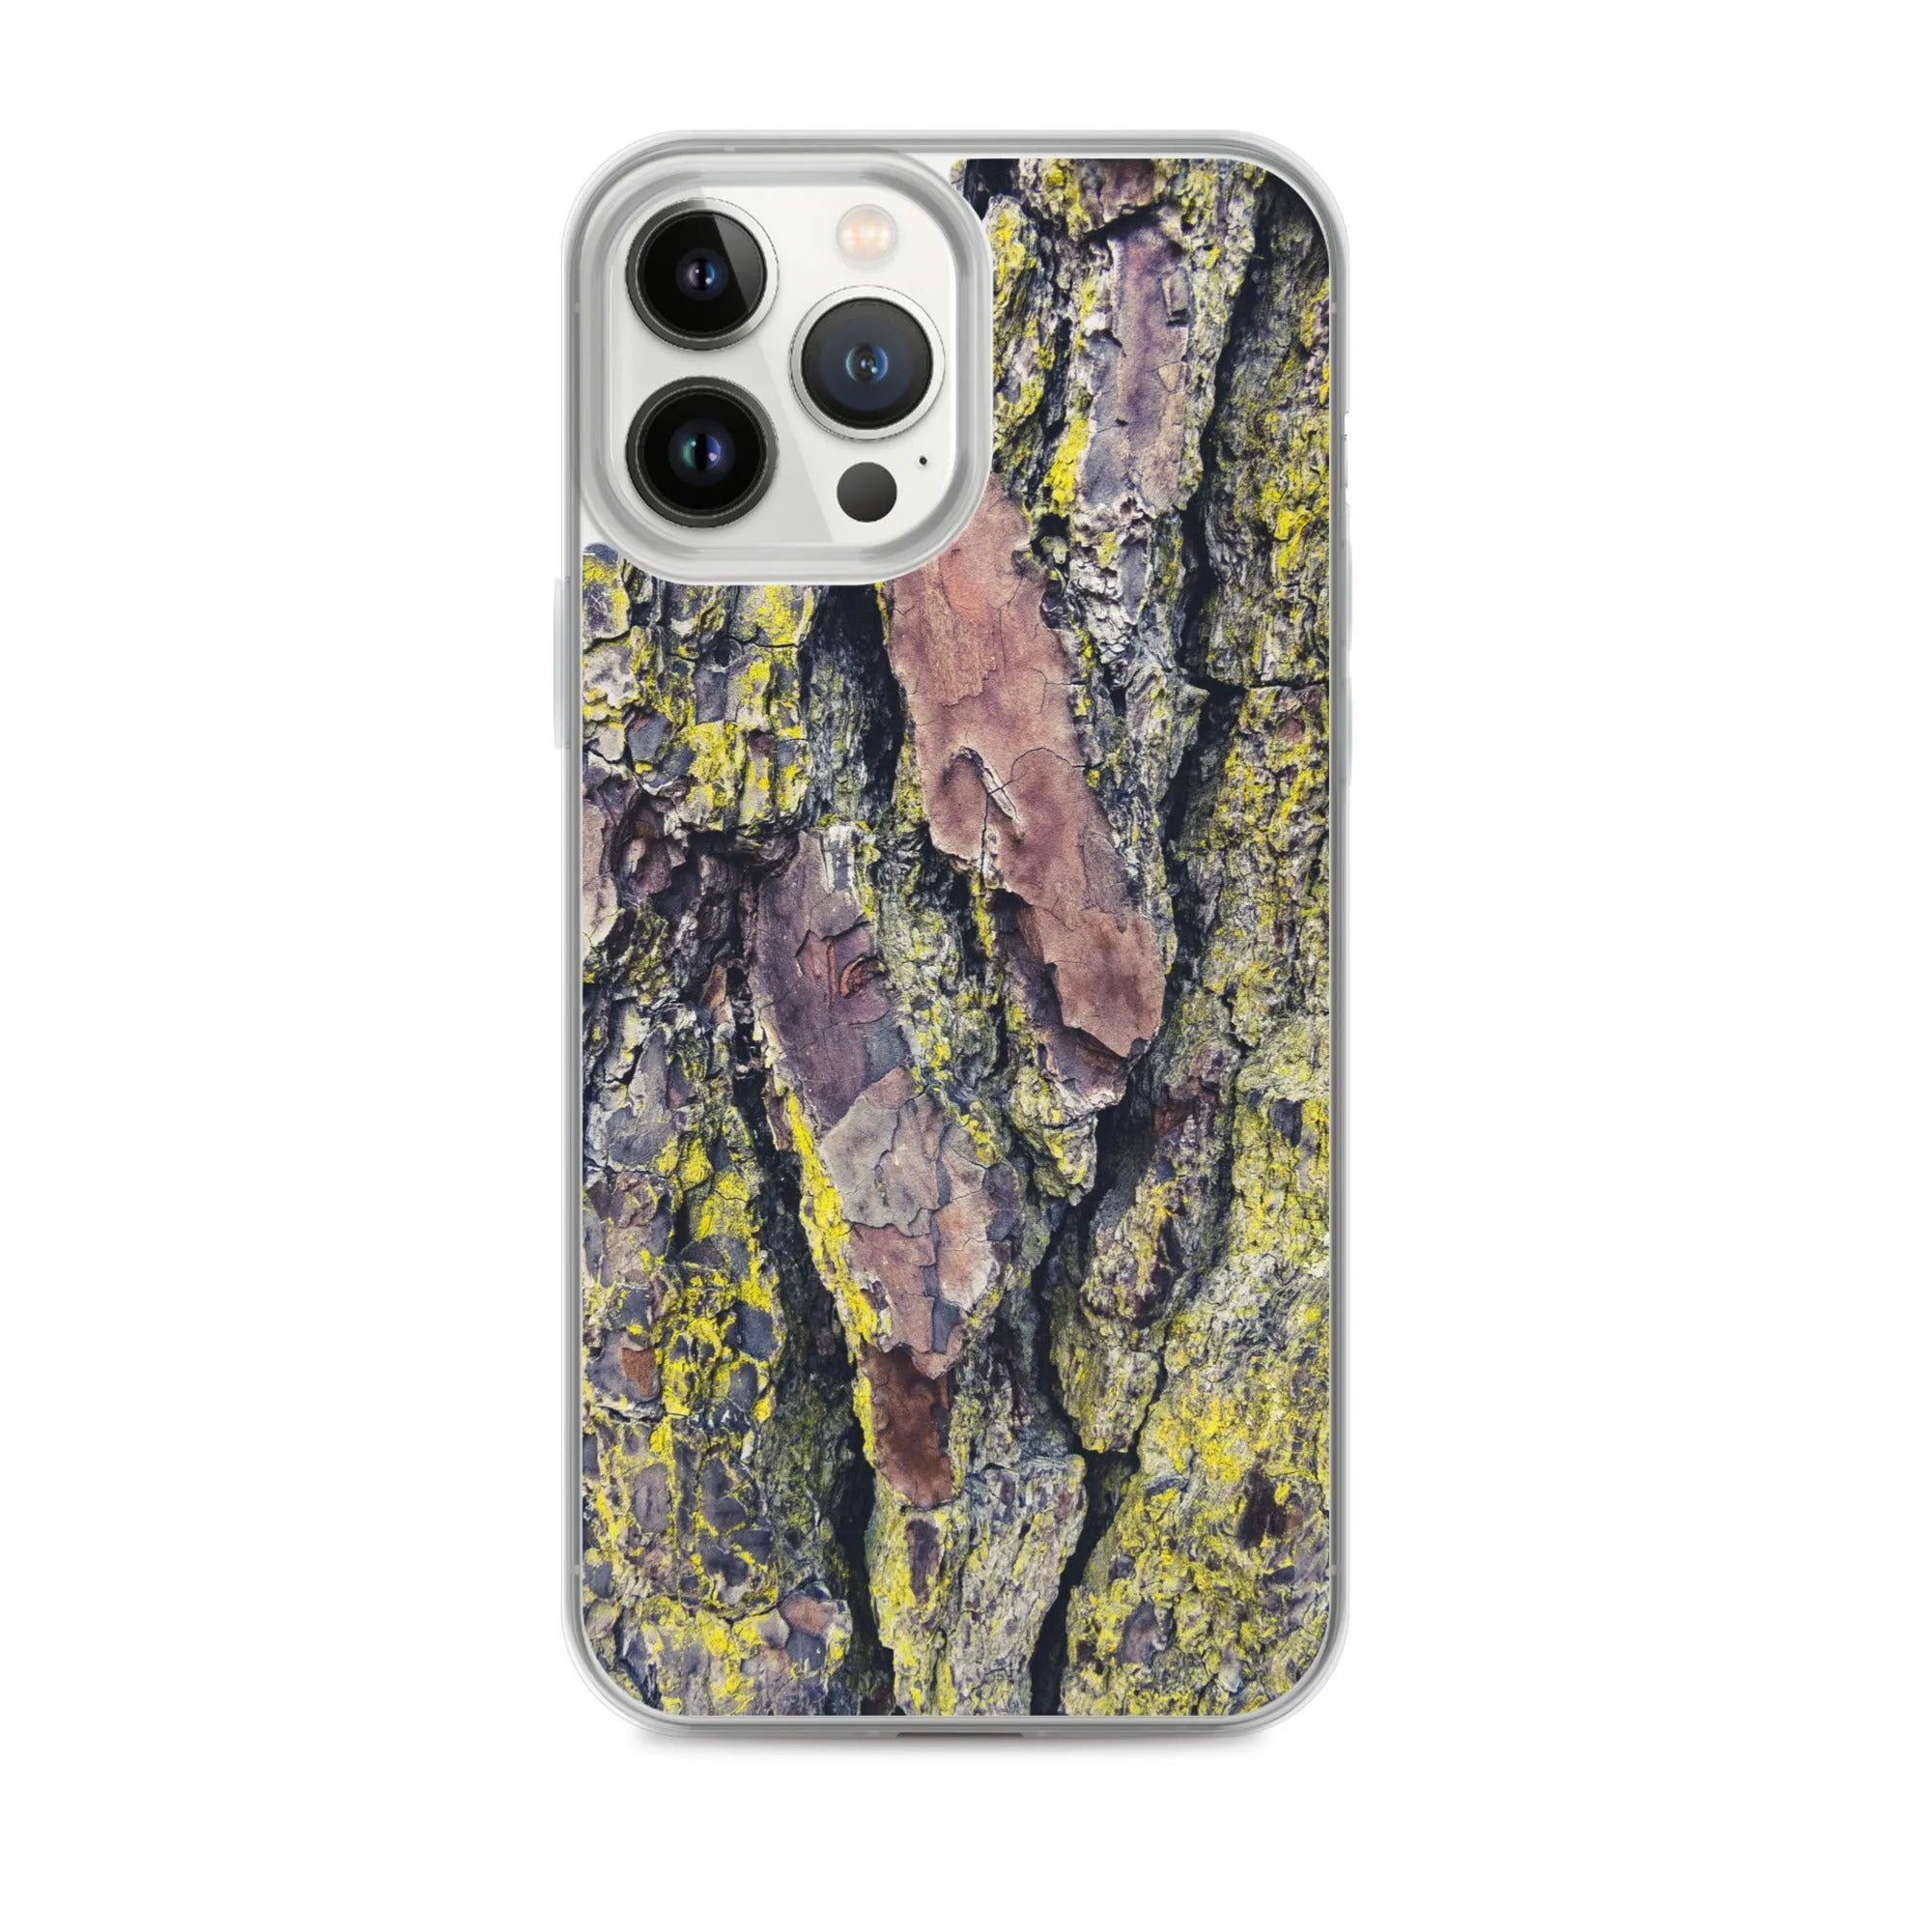 Barking Mad 2 + Too - Botanical Art Pattern Iphone Case - Iphone 13 Pro Max - Mobile Phone Cases - Aesthetic Art